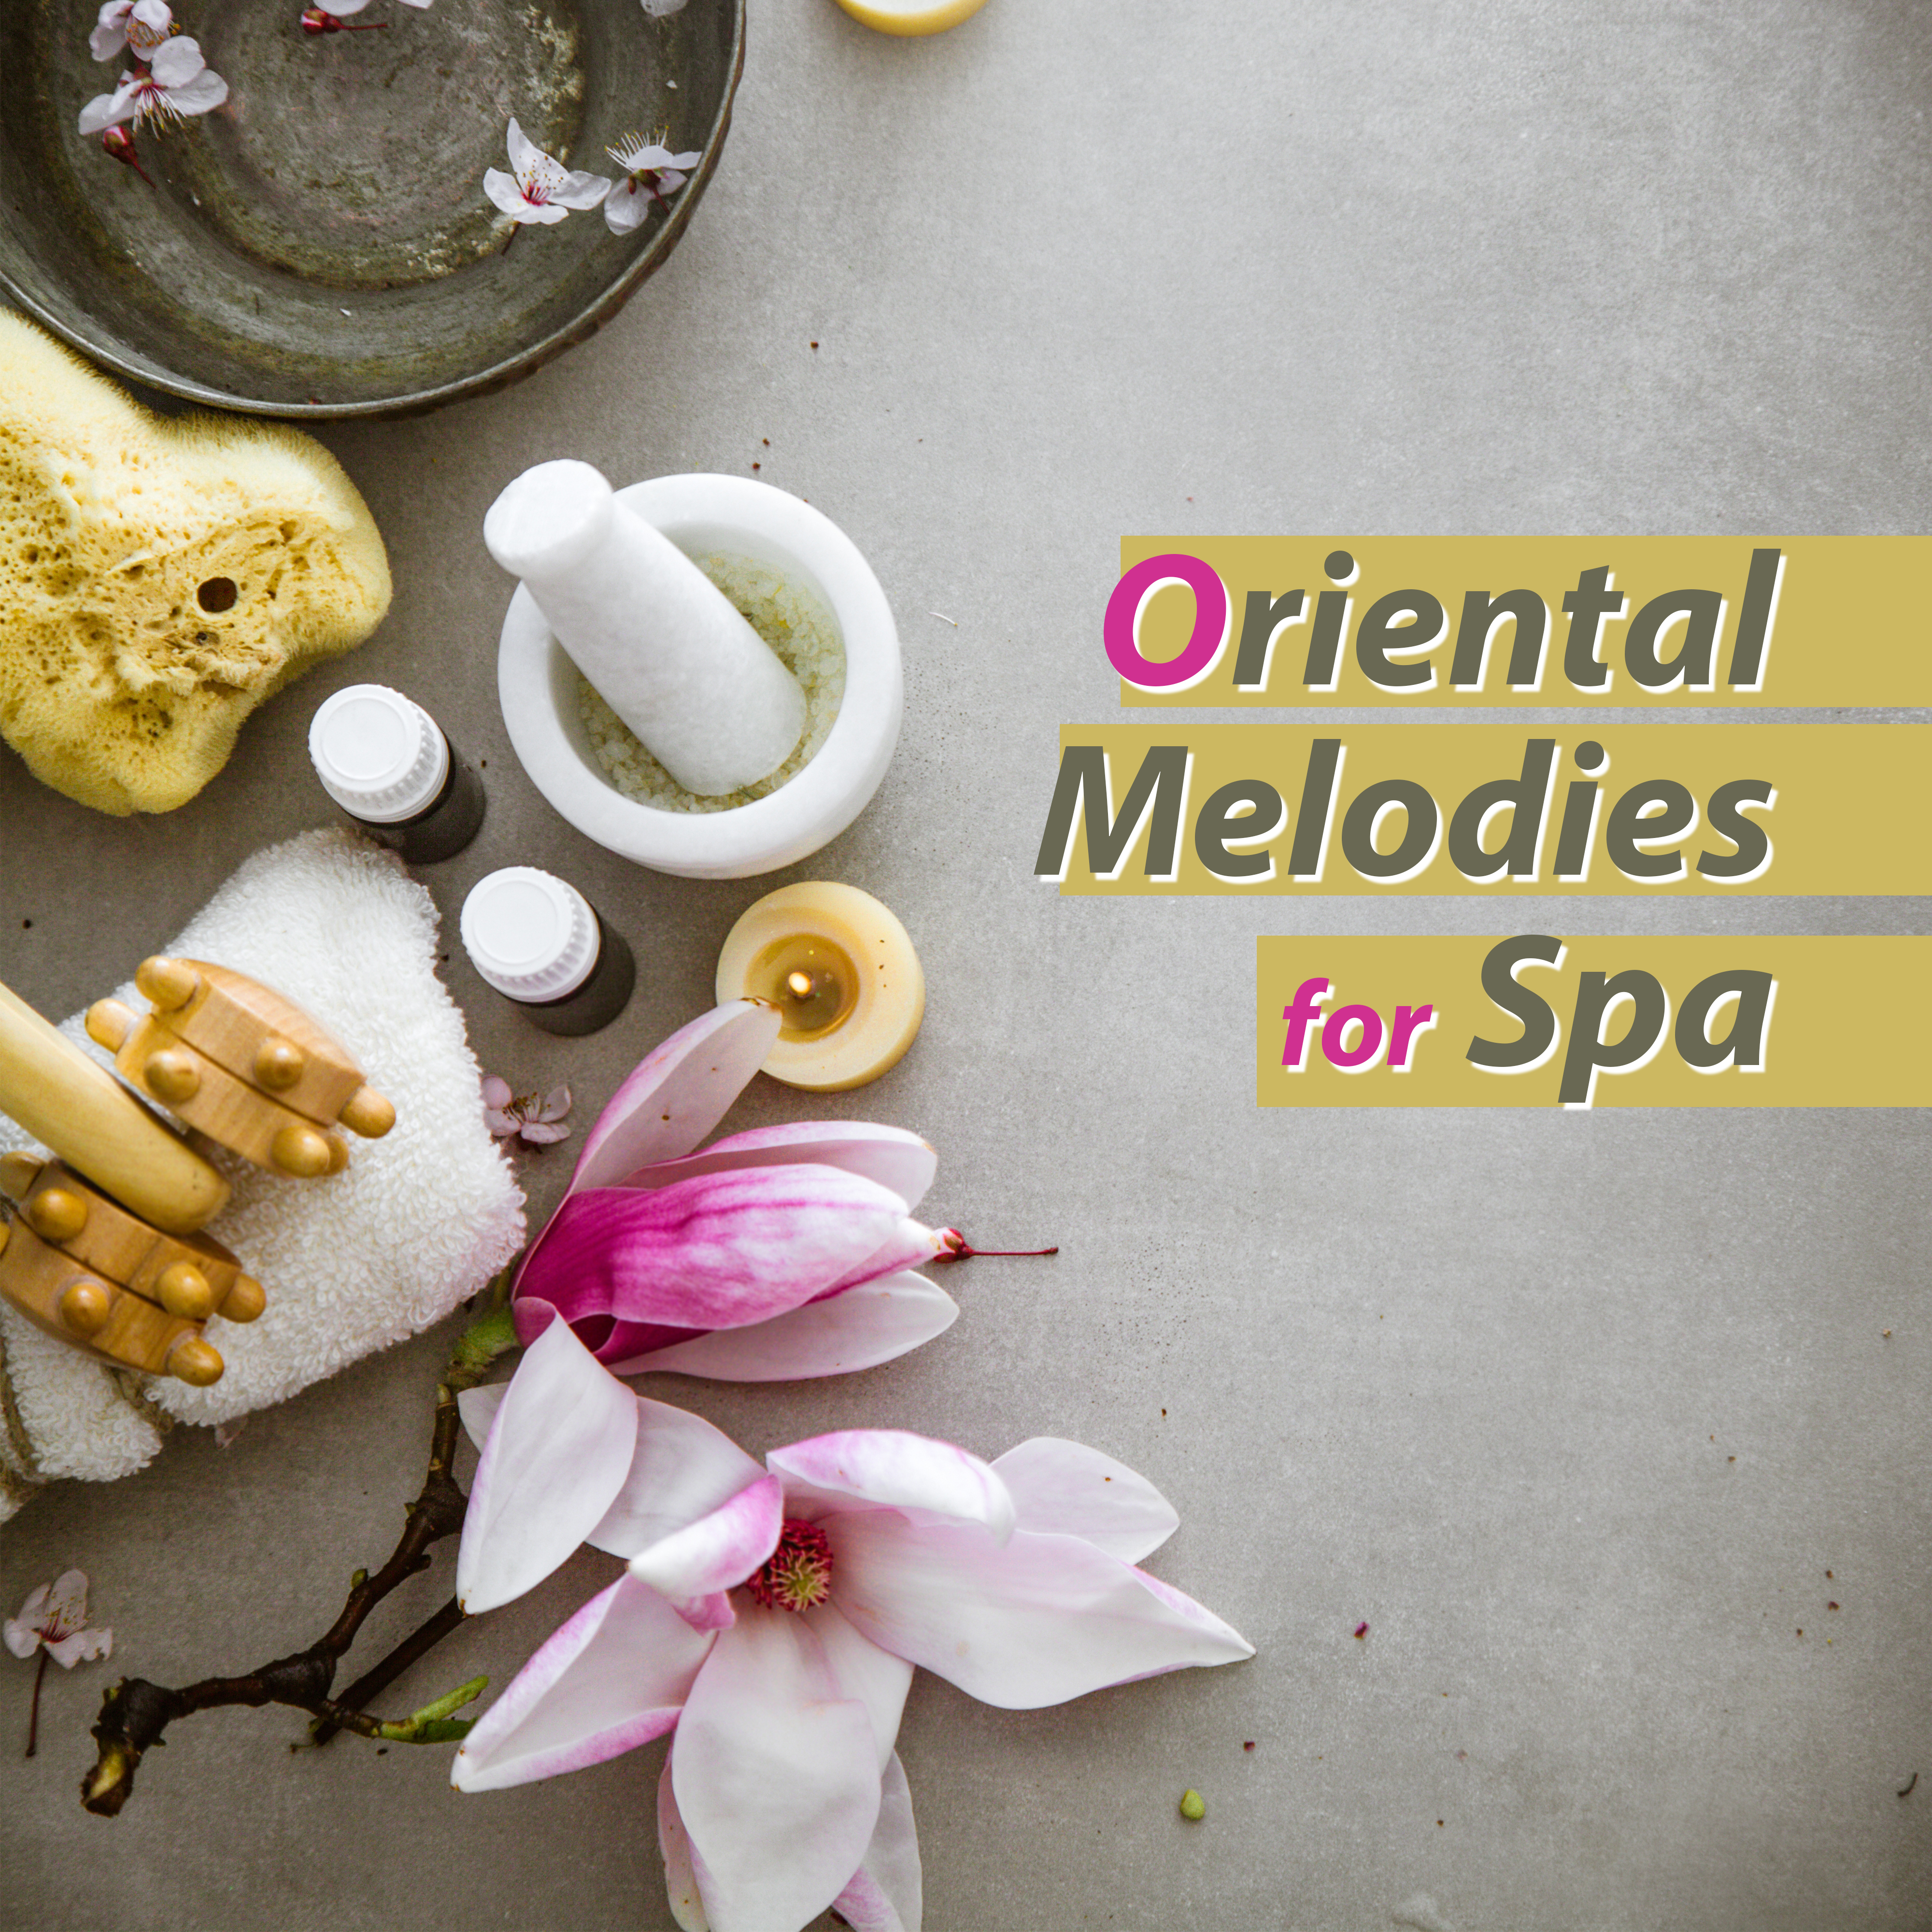 Oriental Melodies for Spa